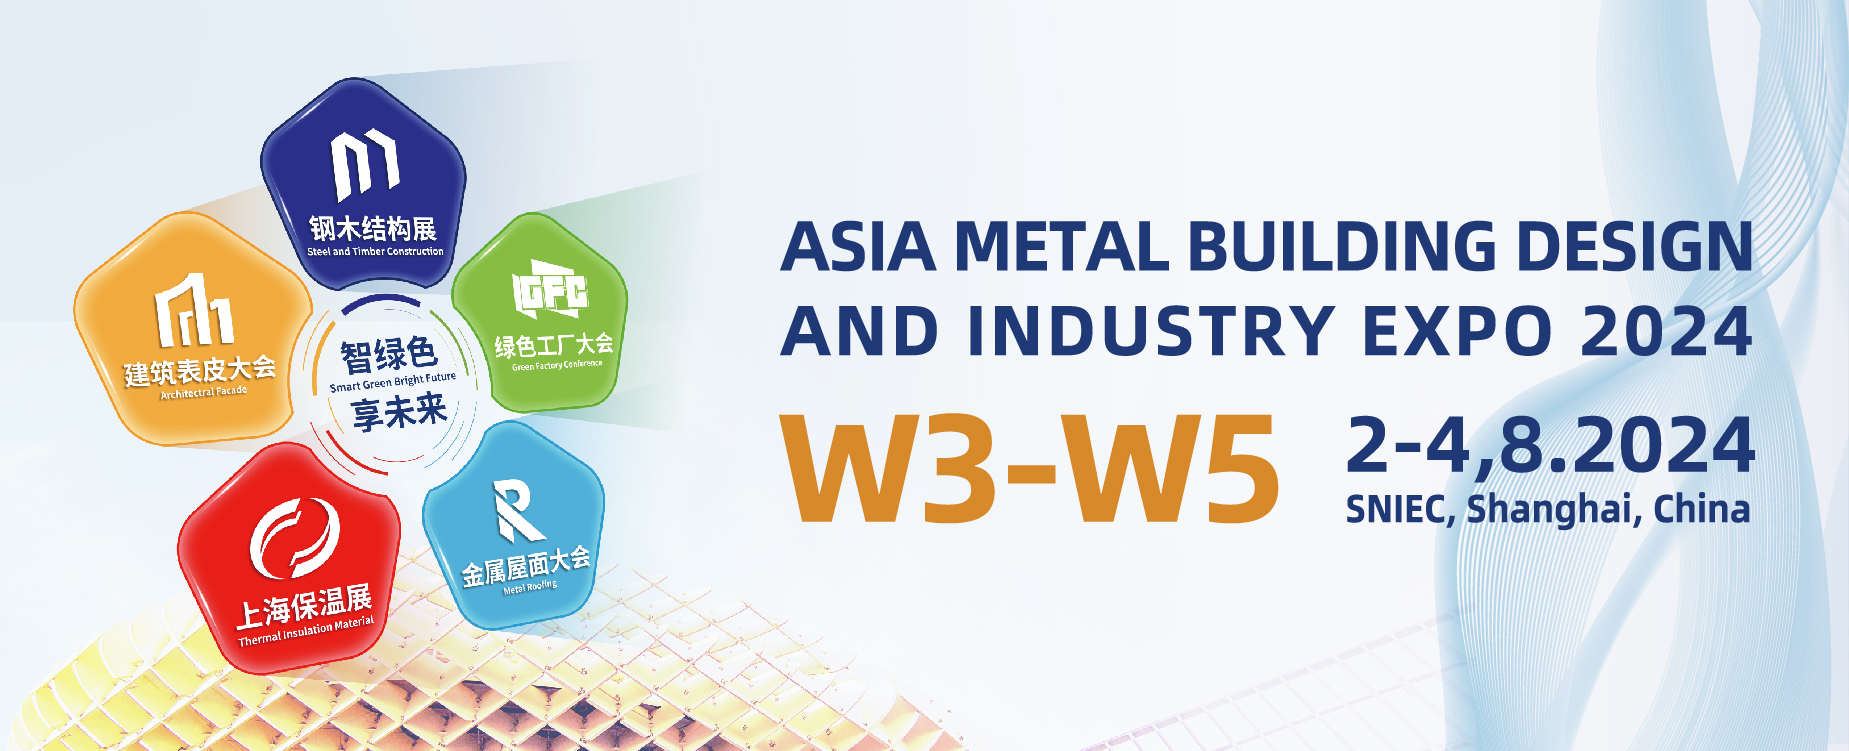 Asia Metal Building Design and Industry Expo 2024(图1)